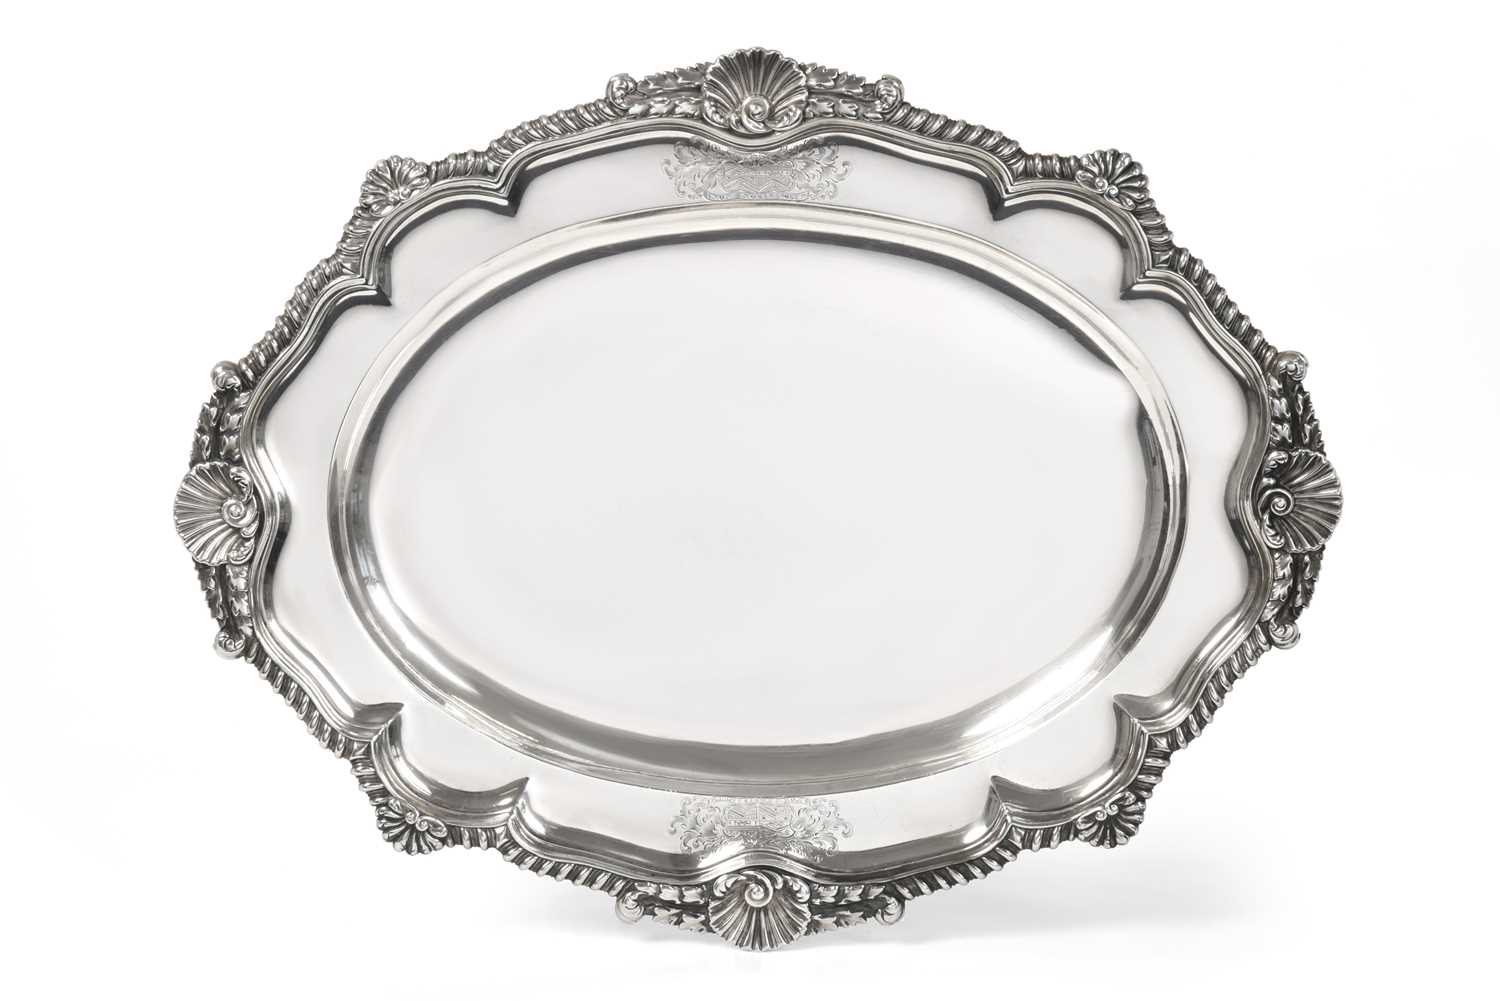 Lot 2100 - A George IV Silver Meat-Dish